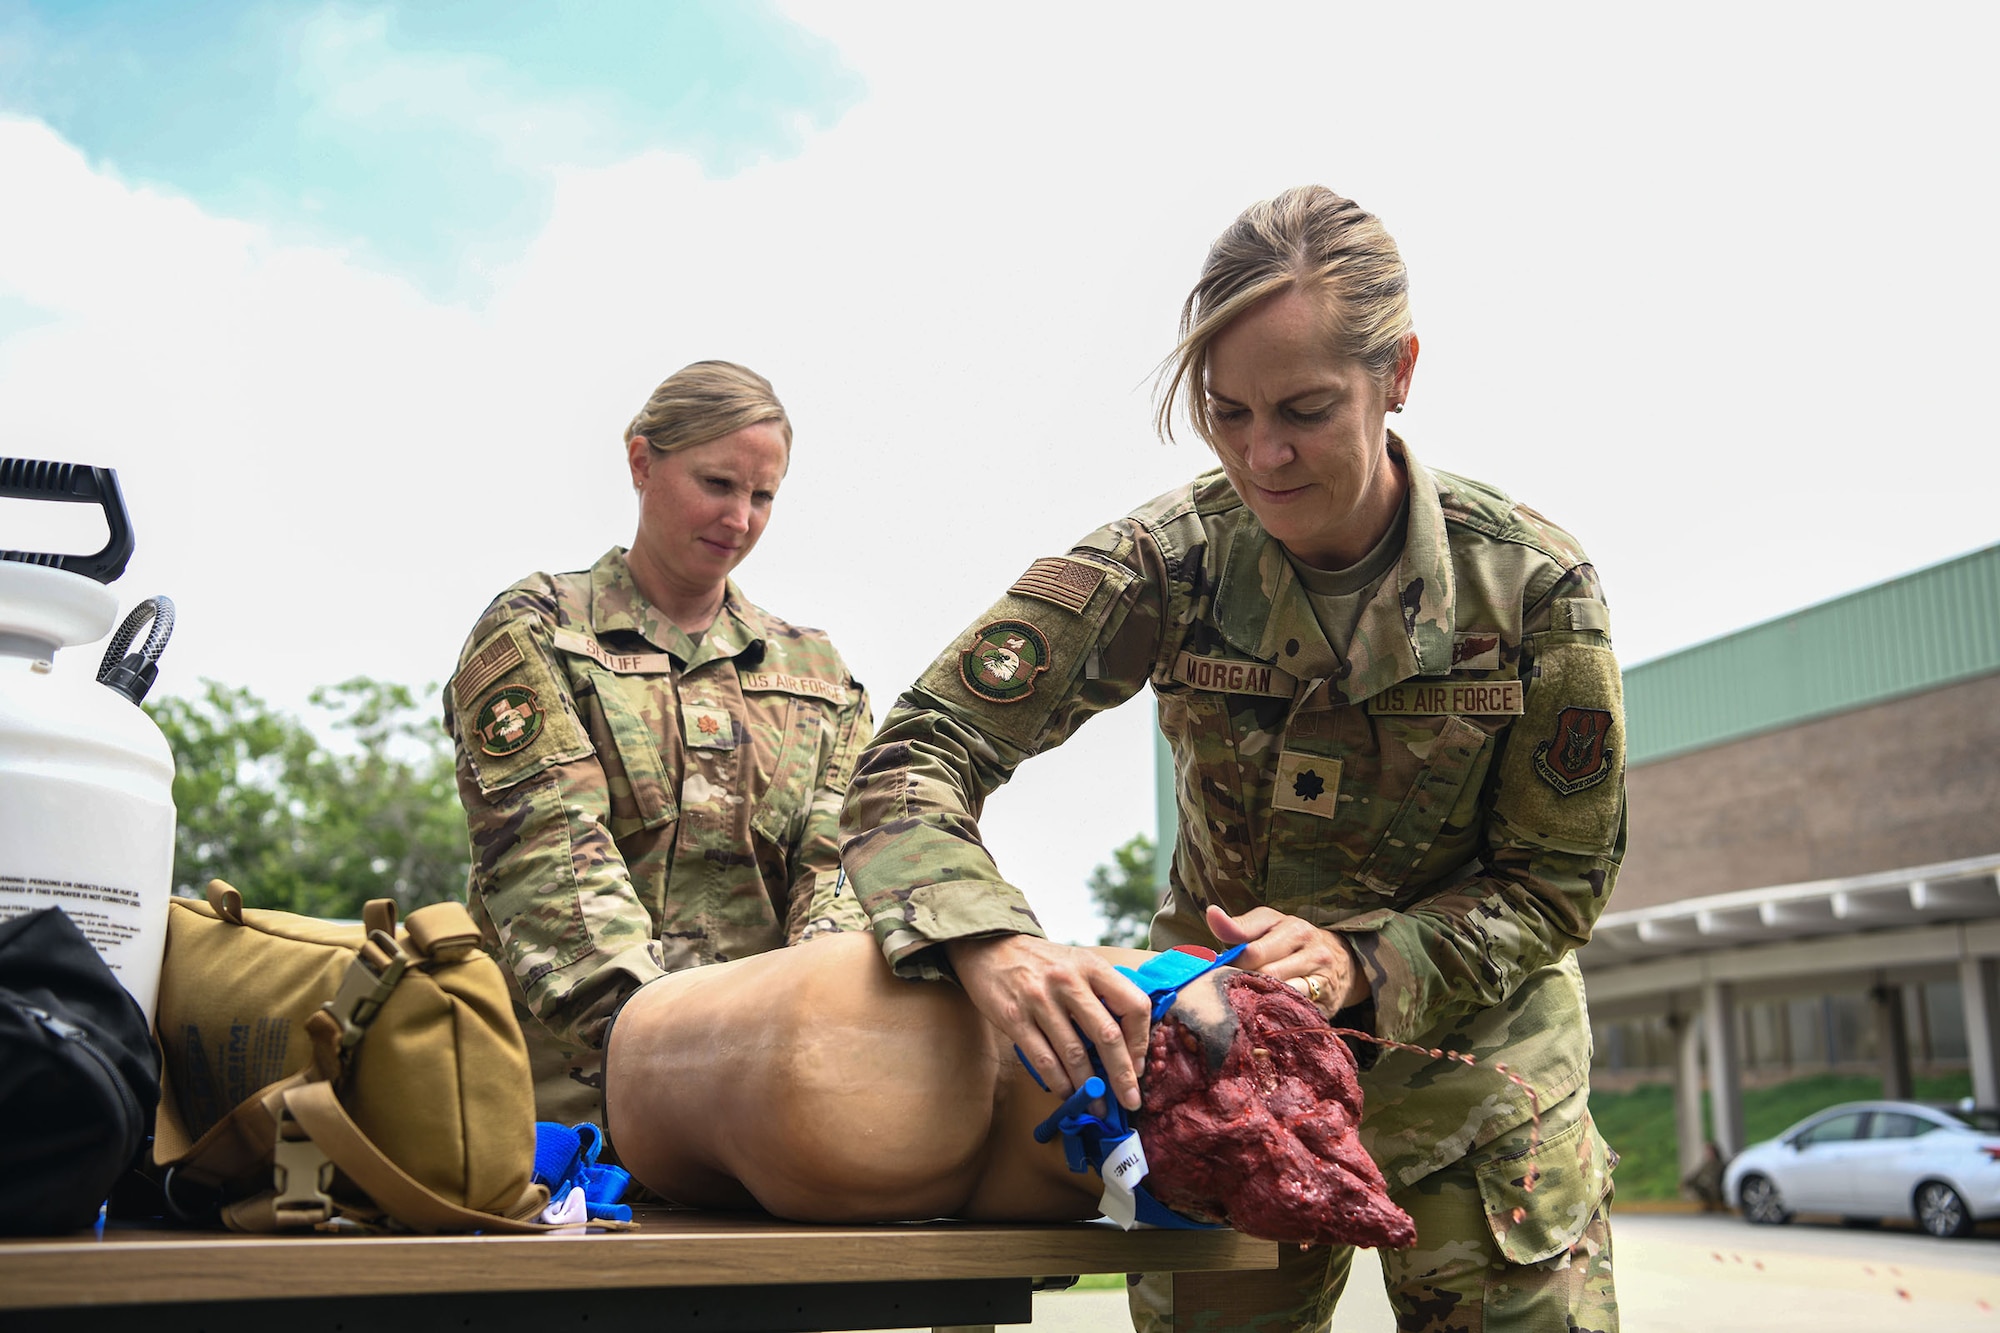 Maj. Michelle Setliff, 445th Aeromedical Staging Squadron, assists Lt. Col. Amelia Morgan, 445th Aerospace Medicine Squadron, on the application of a tourniquet on a training dummy during Tactical Combat Casualty Care (TCCC) training at Burke County High School here June 8, 2021